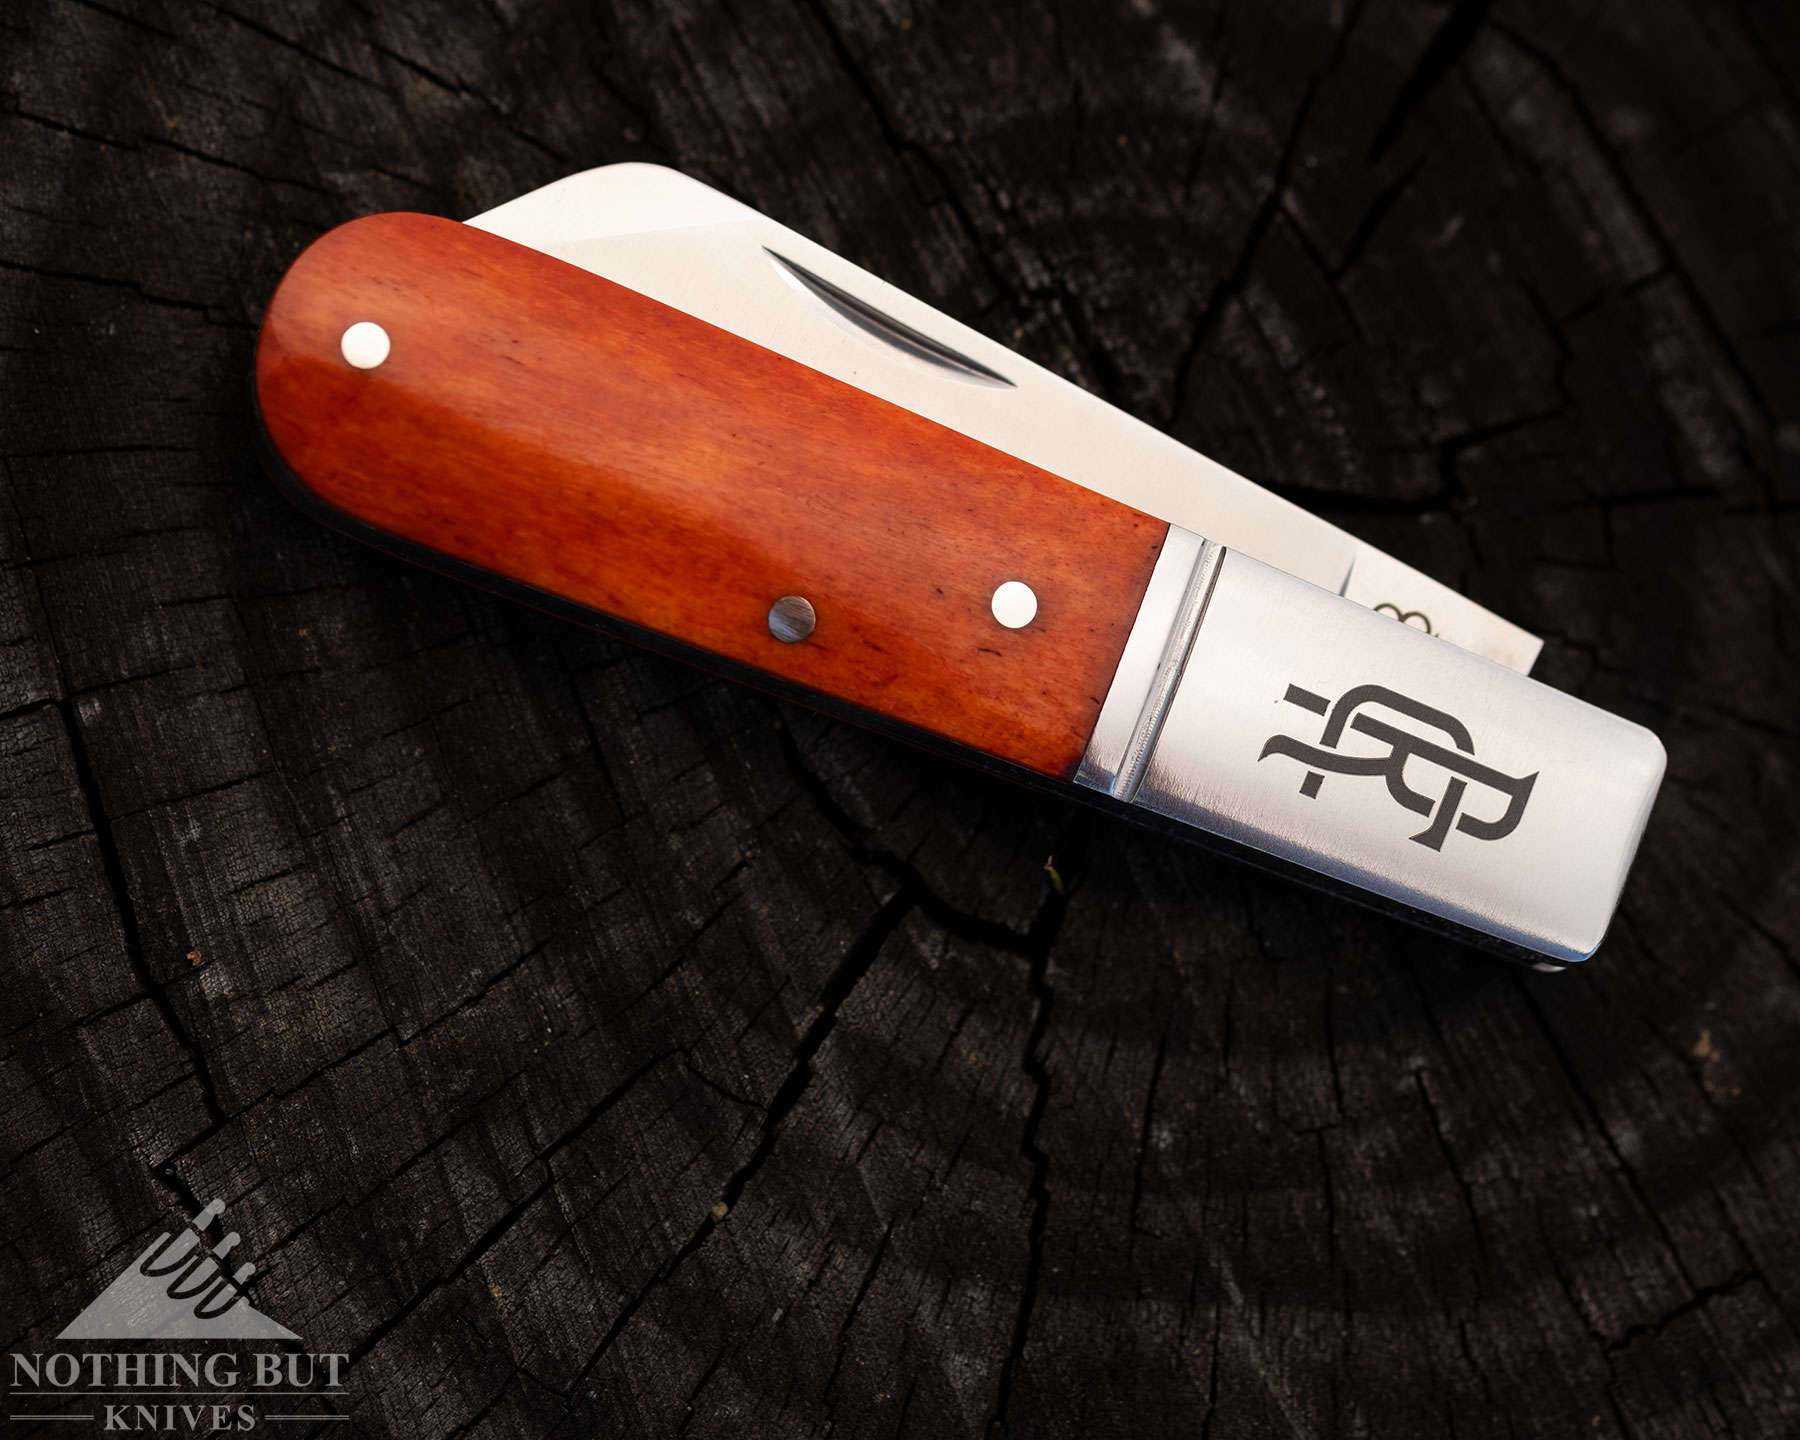 RoseCraft Blades is a new knife company that is growing quickly. 